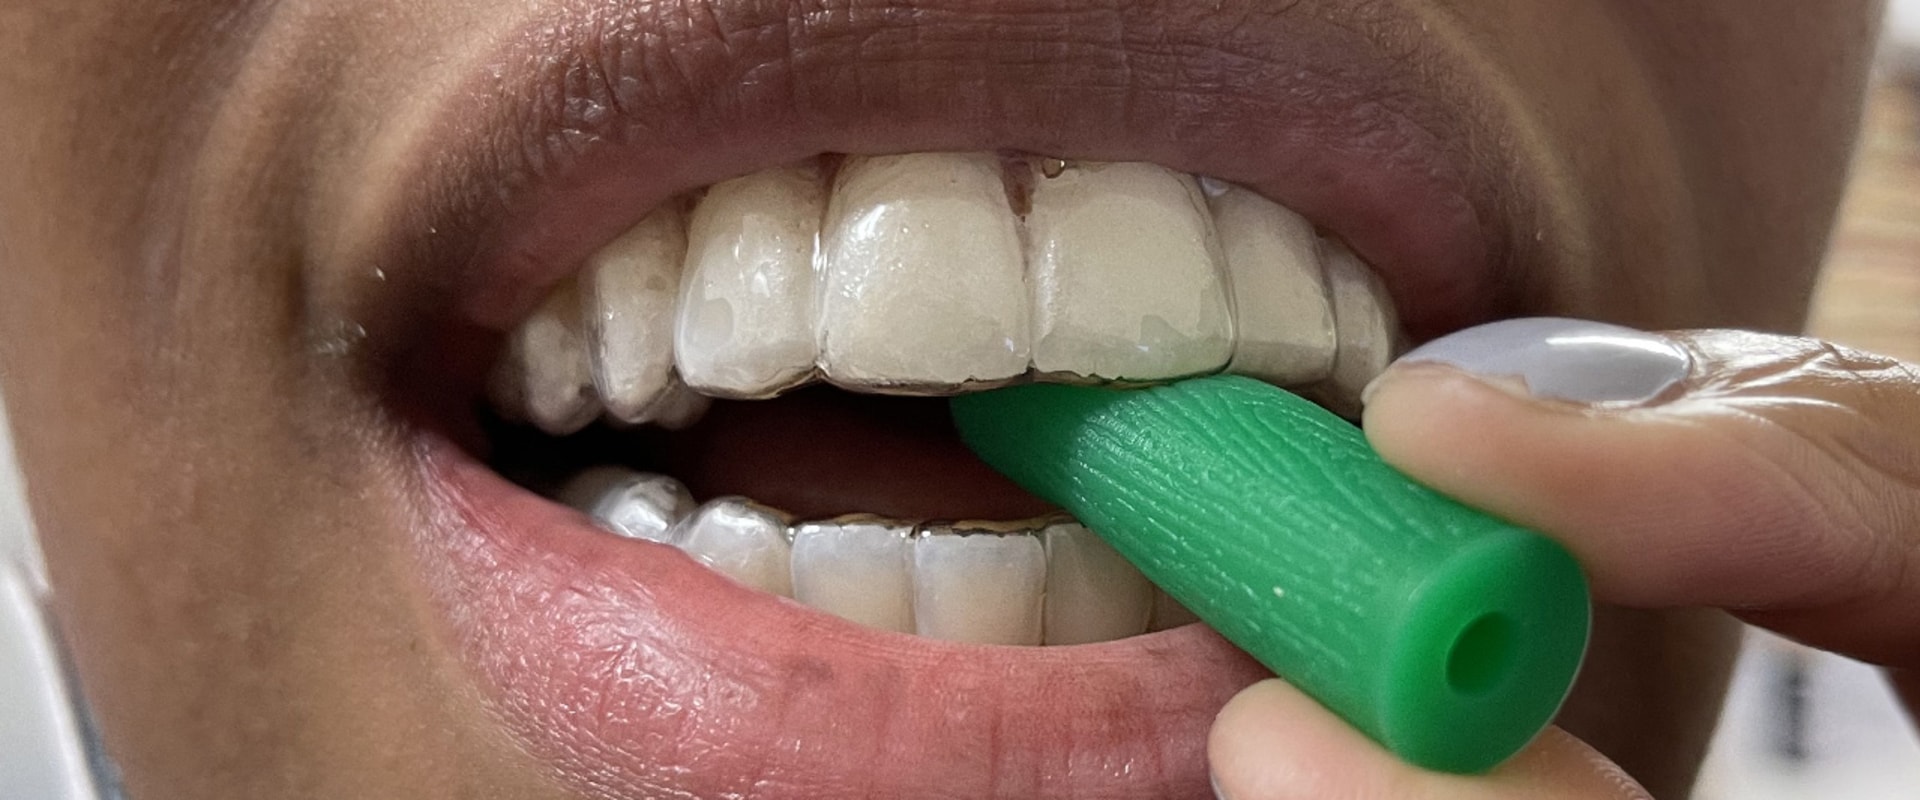 How should invisalign fit in?